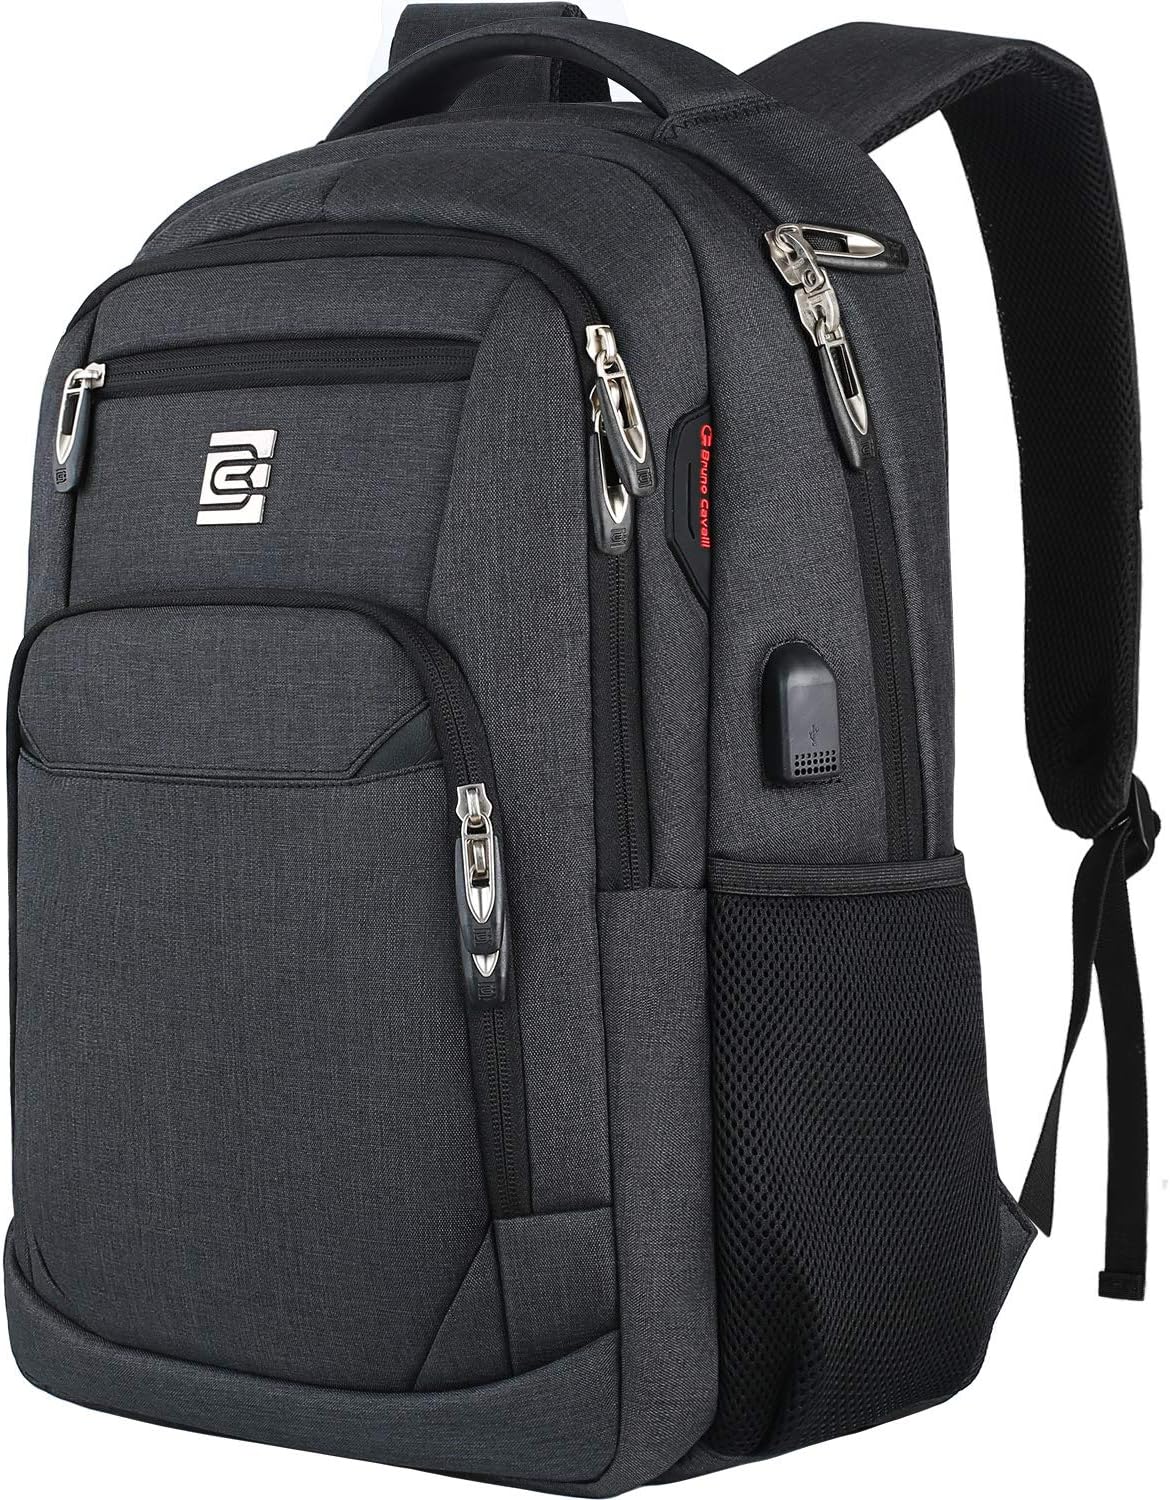 Top 7 Best Backpacks In USA For Travelling & Office Bags